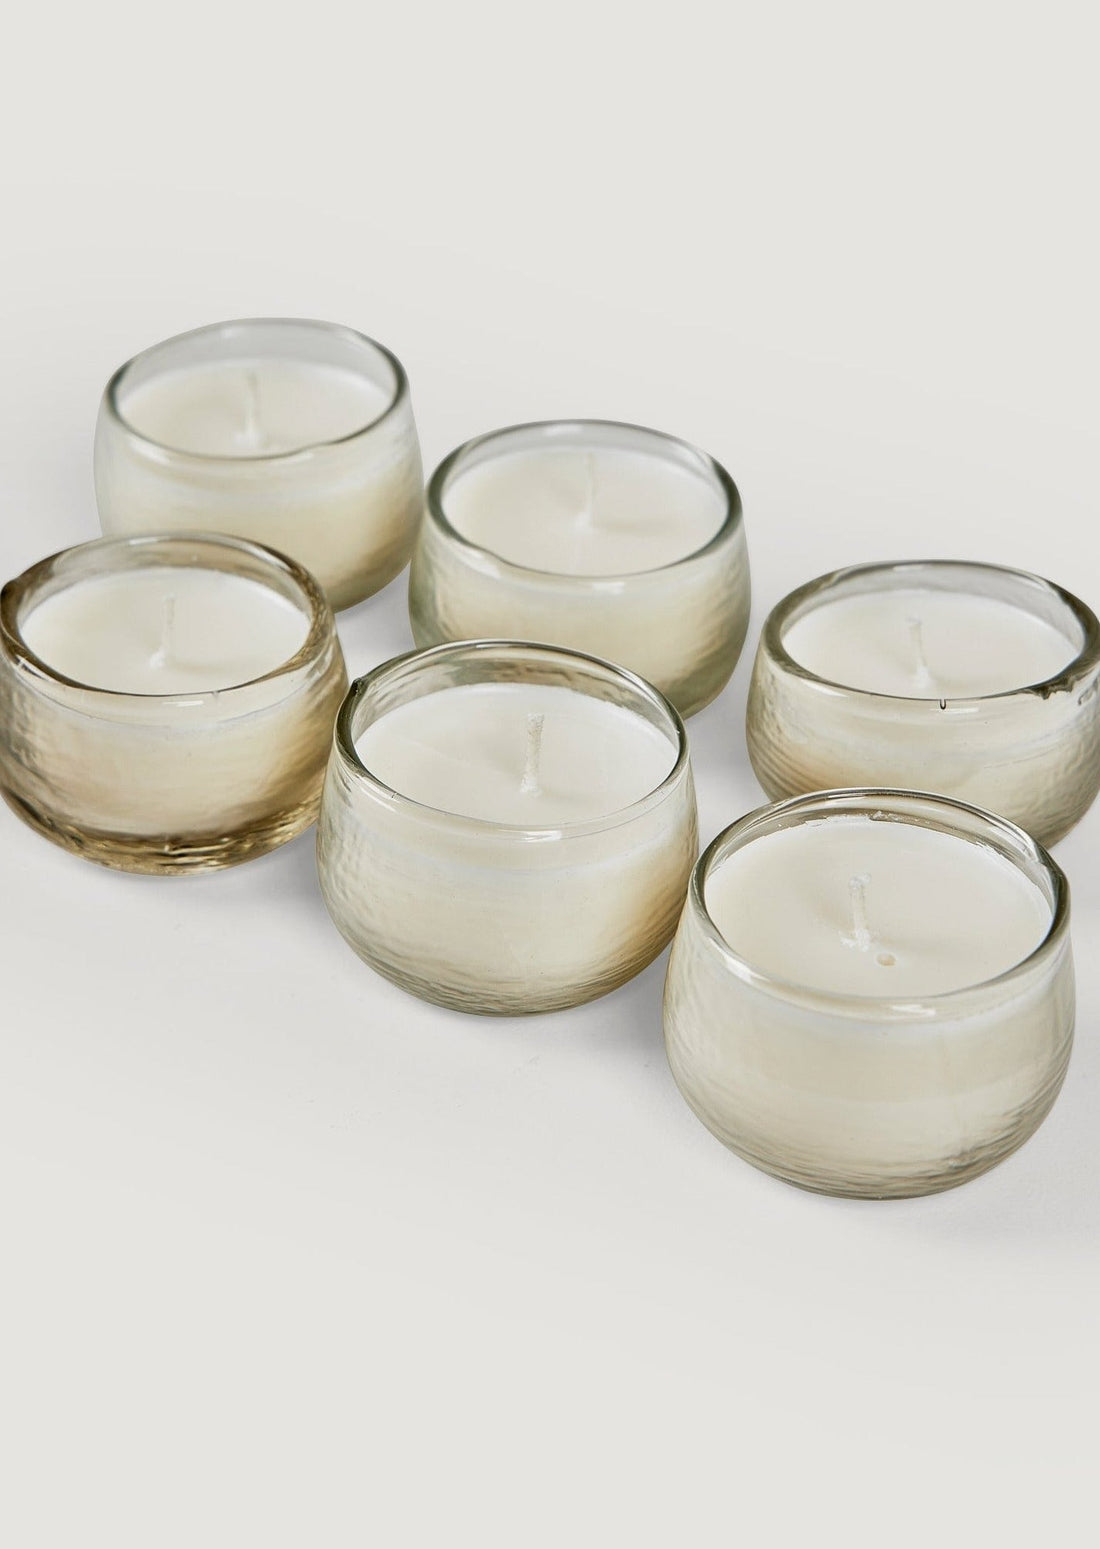 Mini Glass Round Votive Holders Filled with Candles at Afloral